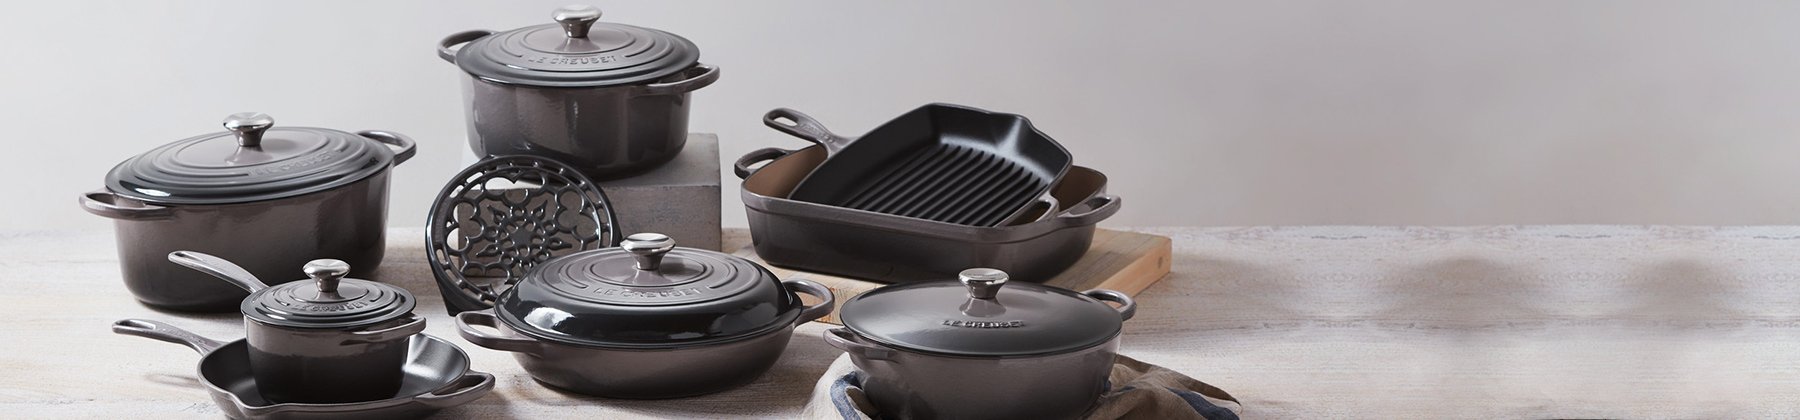 Photo of stainless steel cookware.